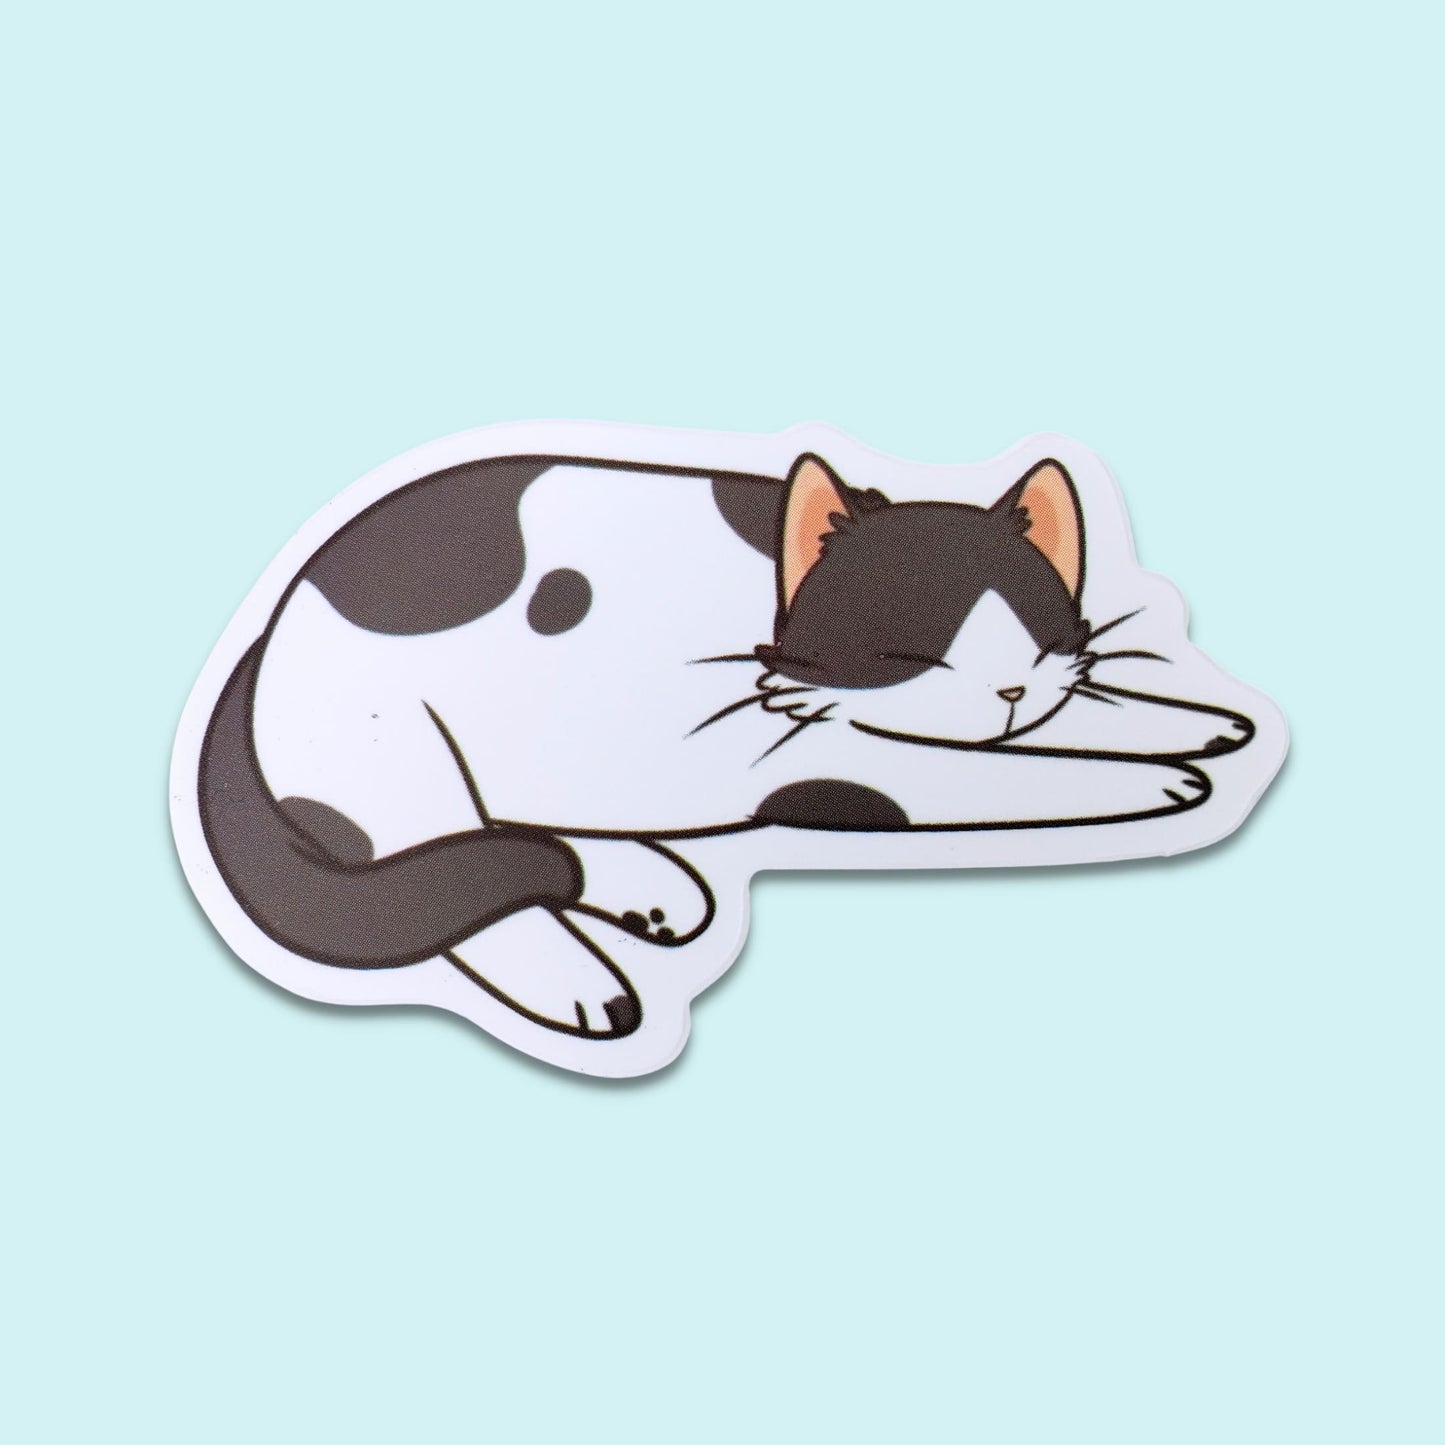 Black and White Cat Sleeping Waterproof Sticker | Cat Nap from Confetti Kitty, Only 1.00